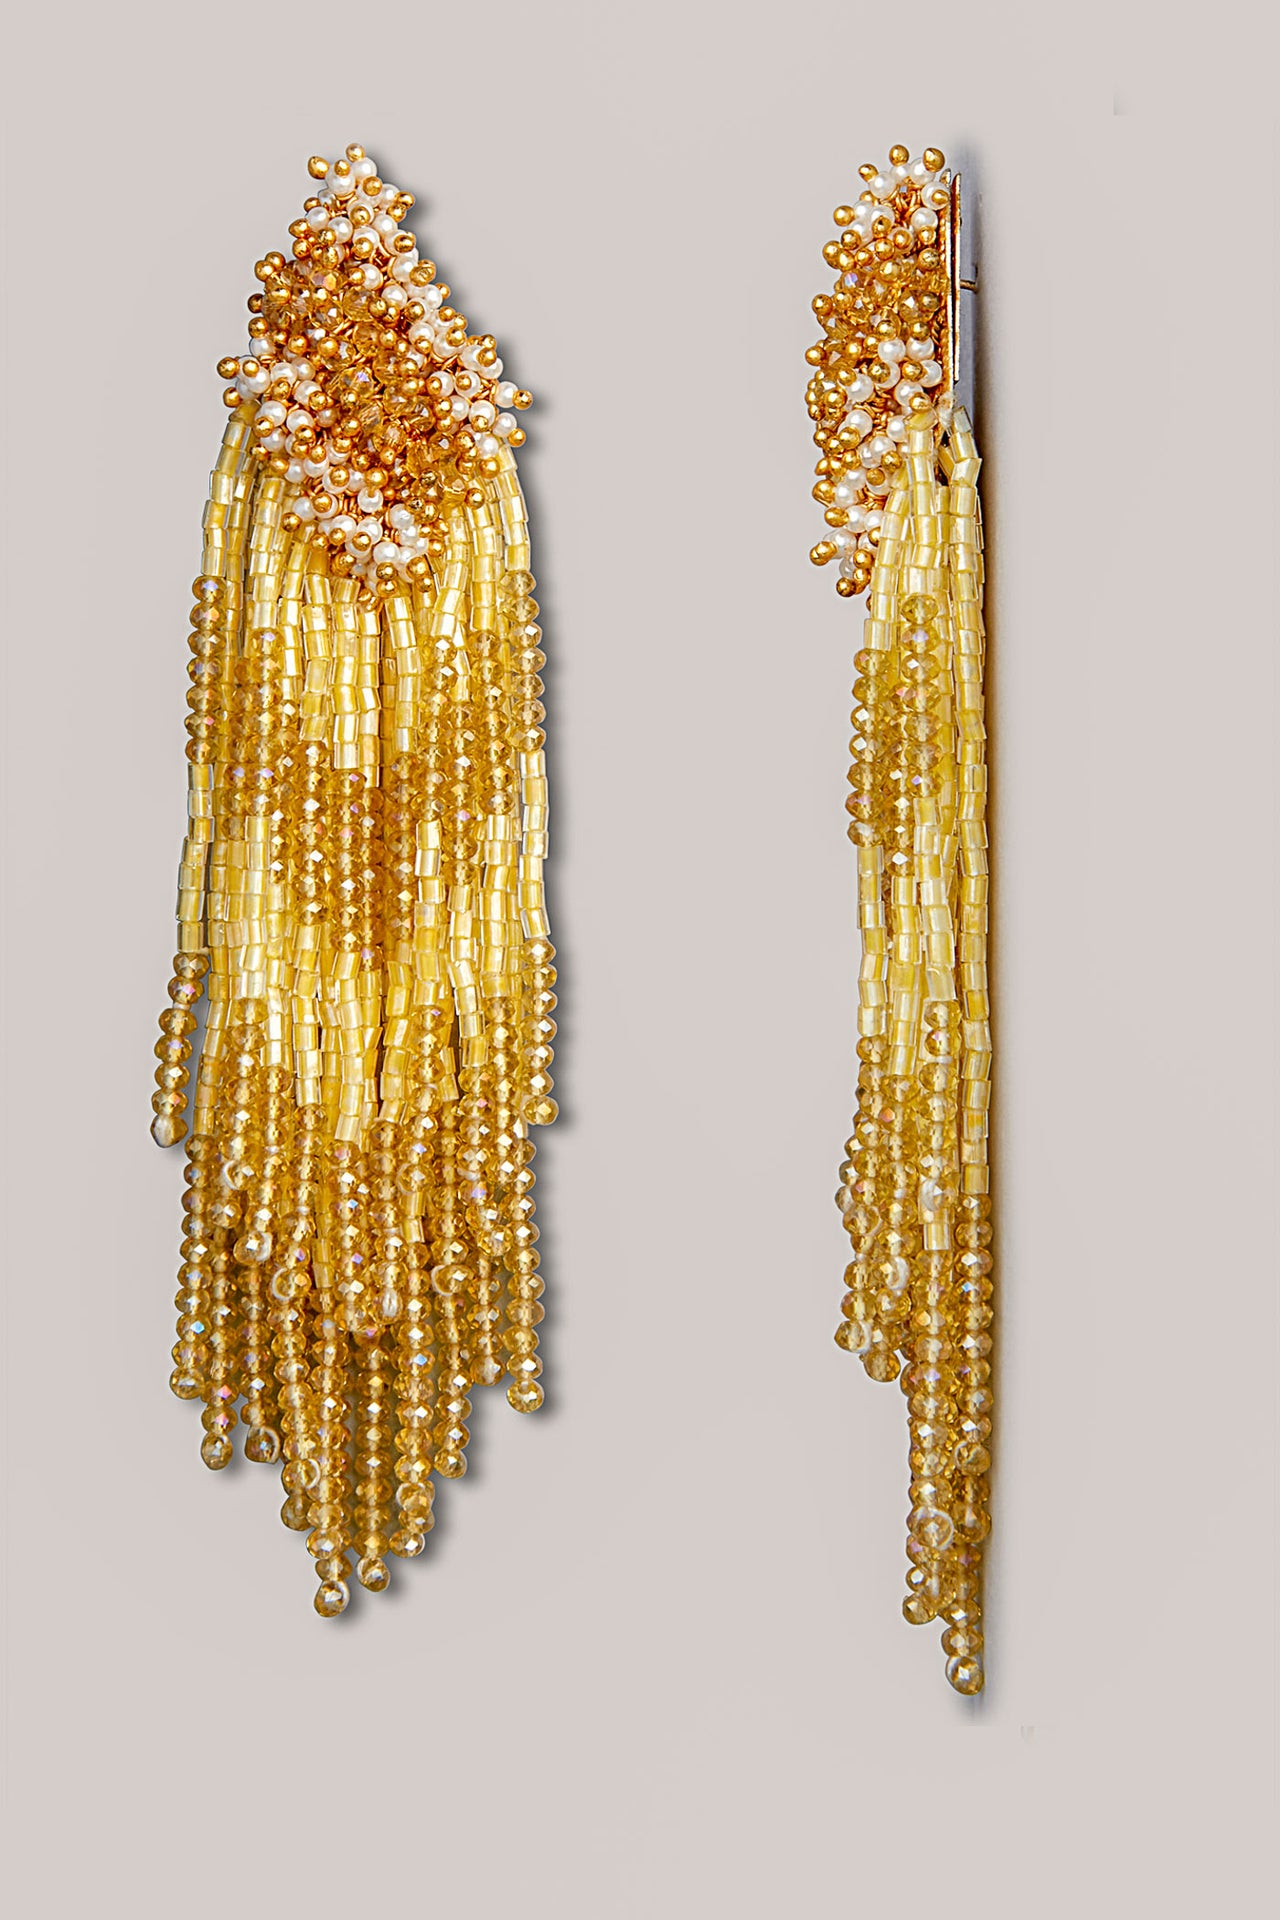 DORO - The Beautiful Yellow Danglers Embellished With Unique Pearls - Meraki Lifestyle Store